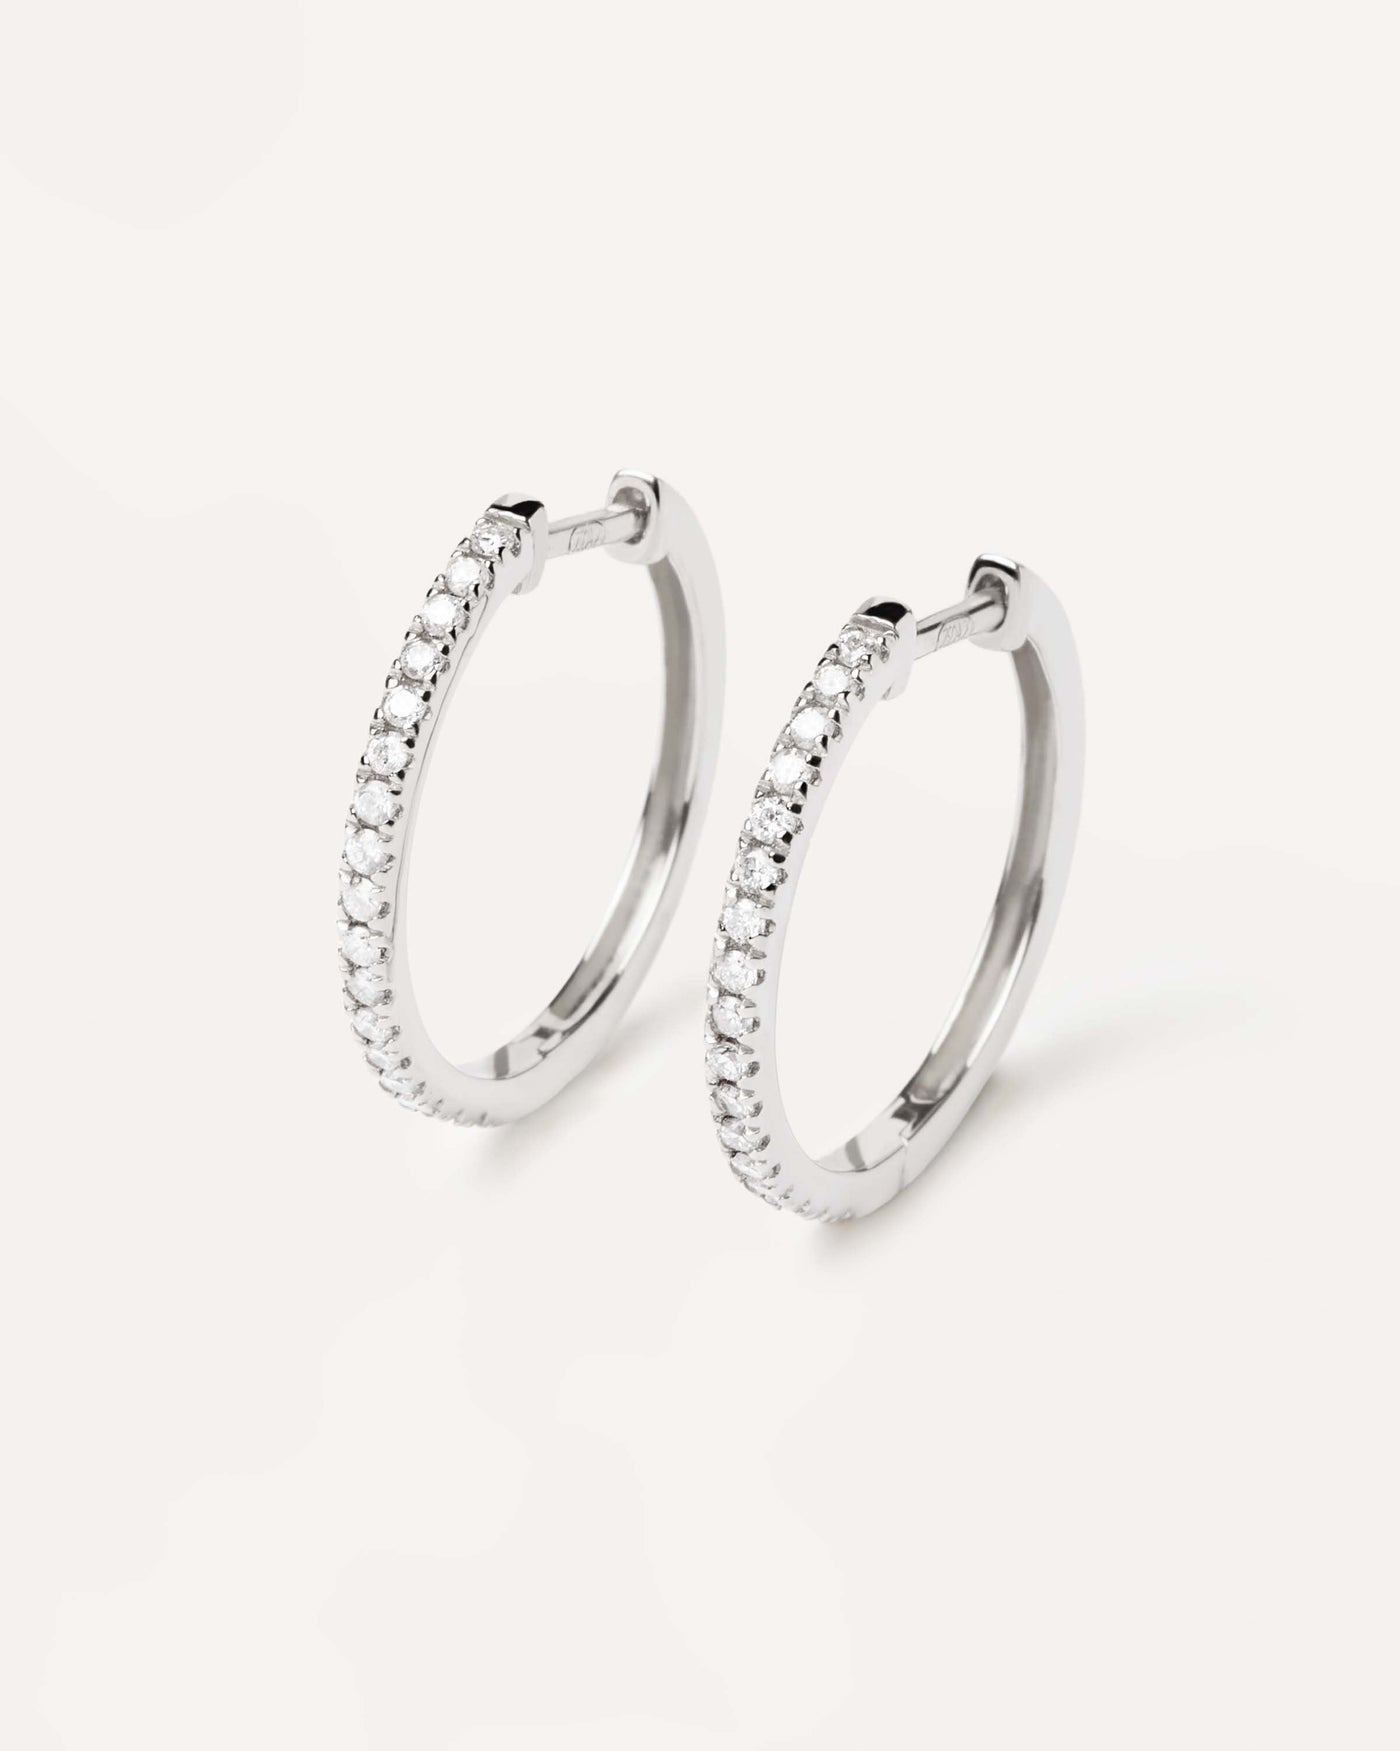 2023 Selection | Diamonds and White Gold Eternity Medium Hoops. Solid white gold hoop earrings, set with lab-grown diamonds of 0.39 carats in total. Get the latest arrival from PDPAOLA. Place your order safely and get this Best Seller. Free Shipping.